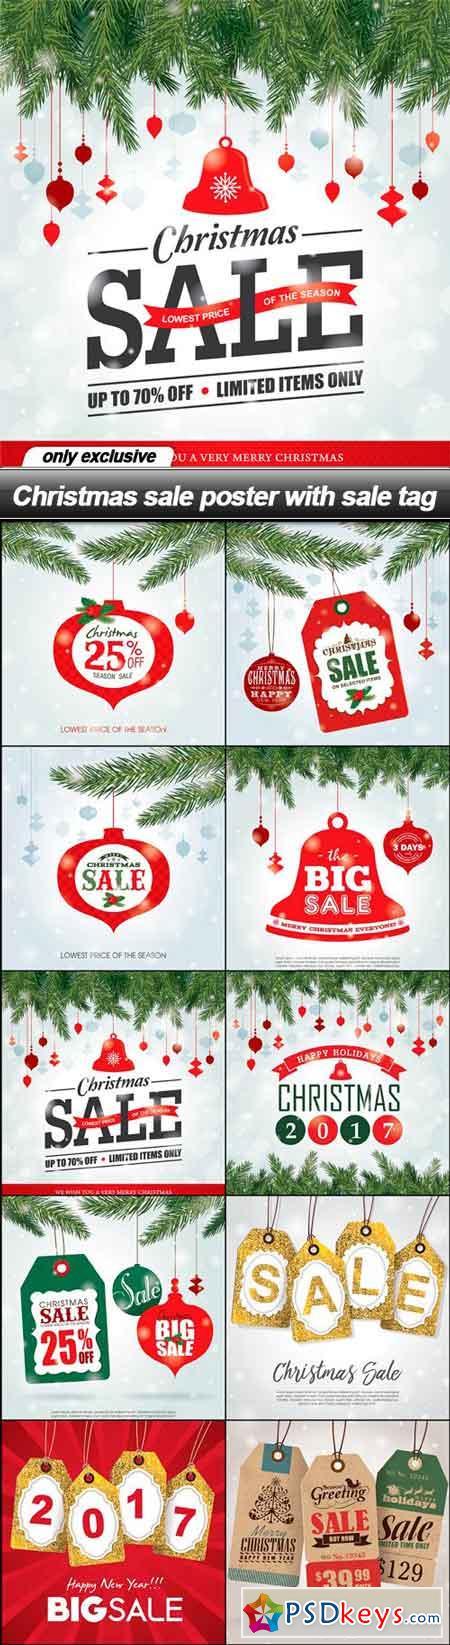 Christmas sale poster with sale tag - 10 EPS